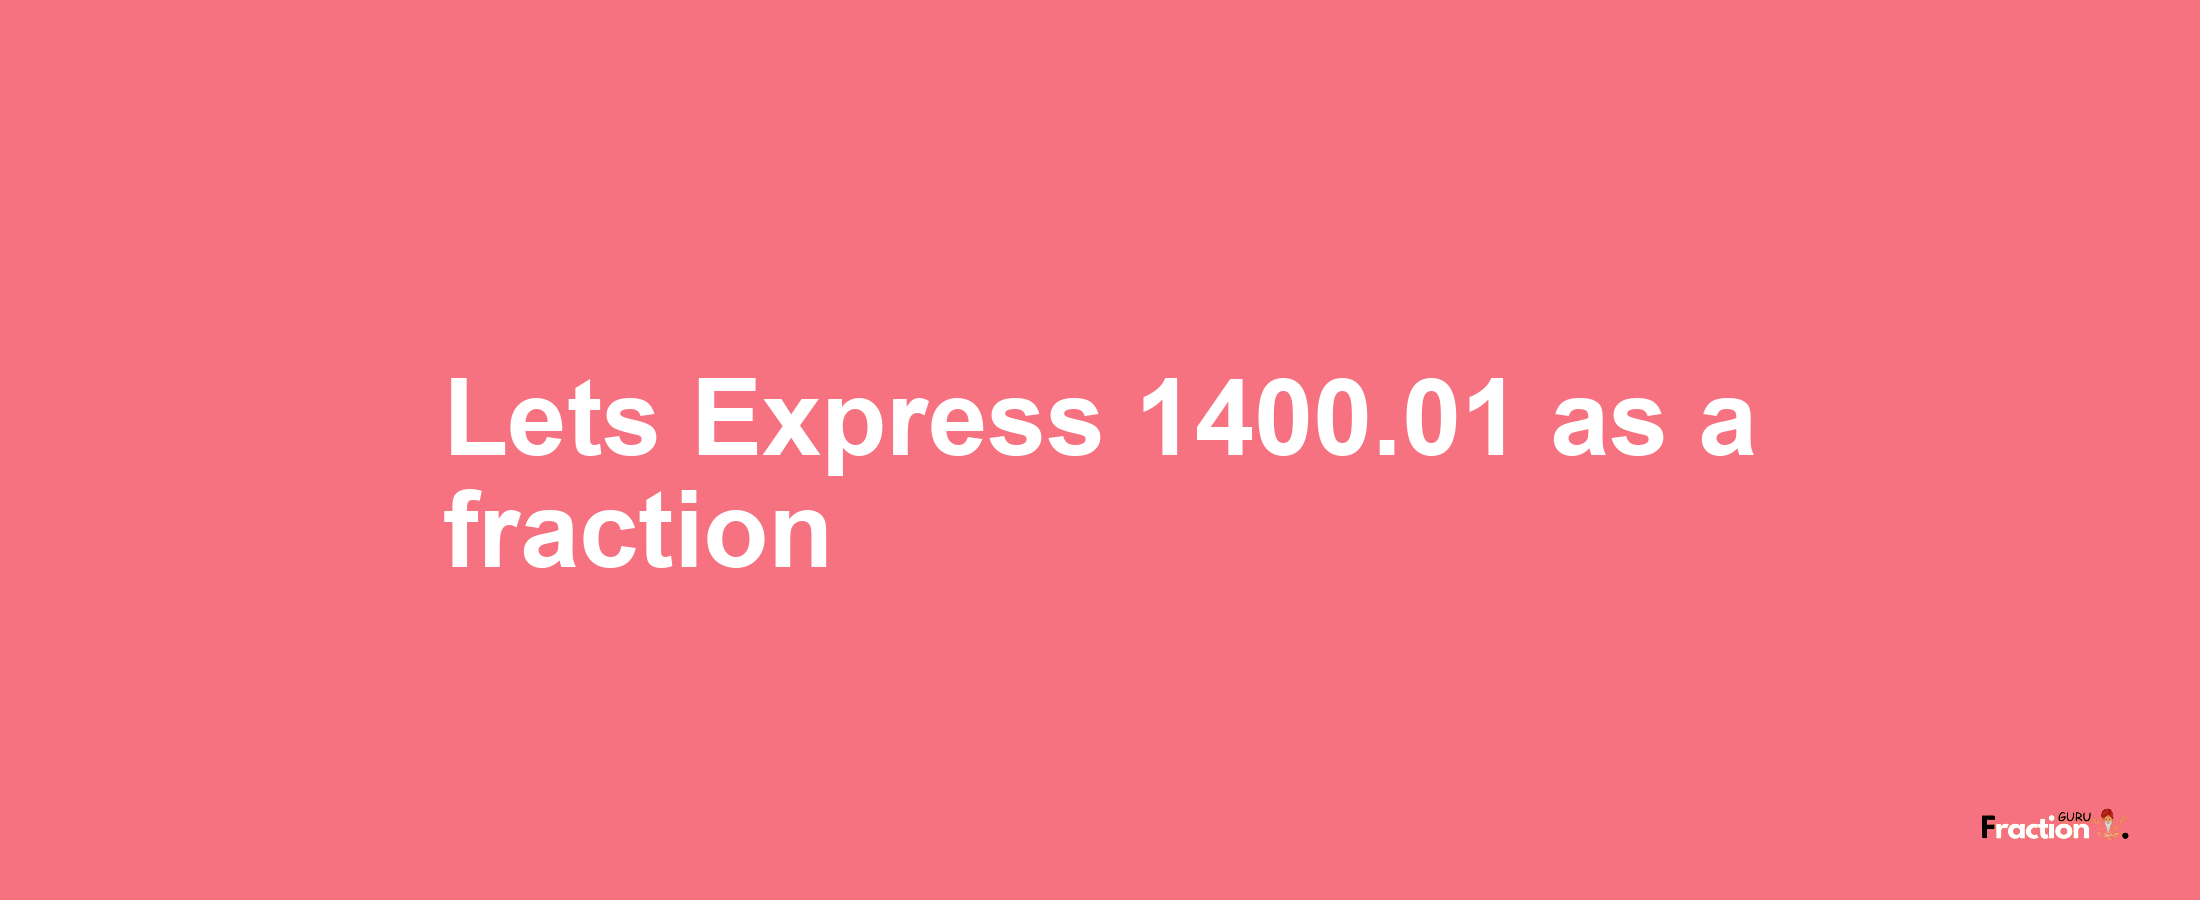 Lets Express 1400.01 as afraction